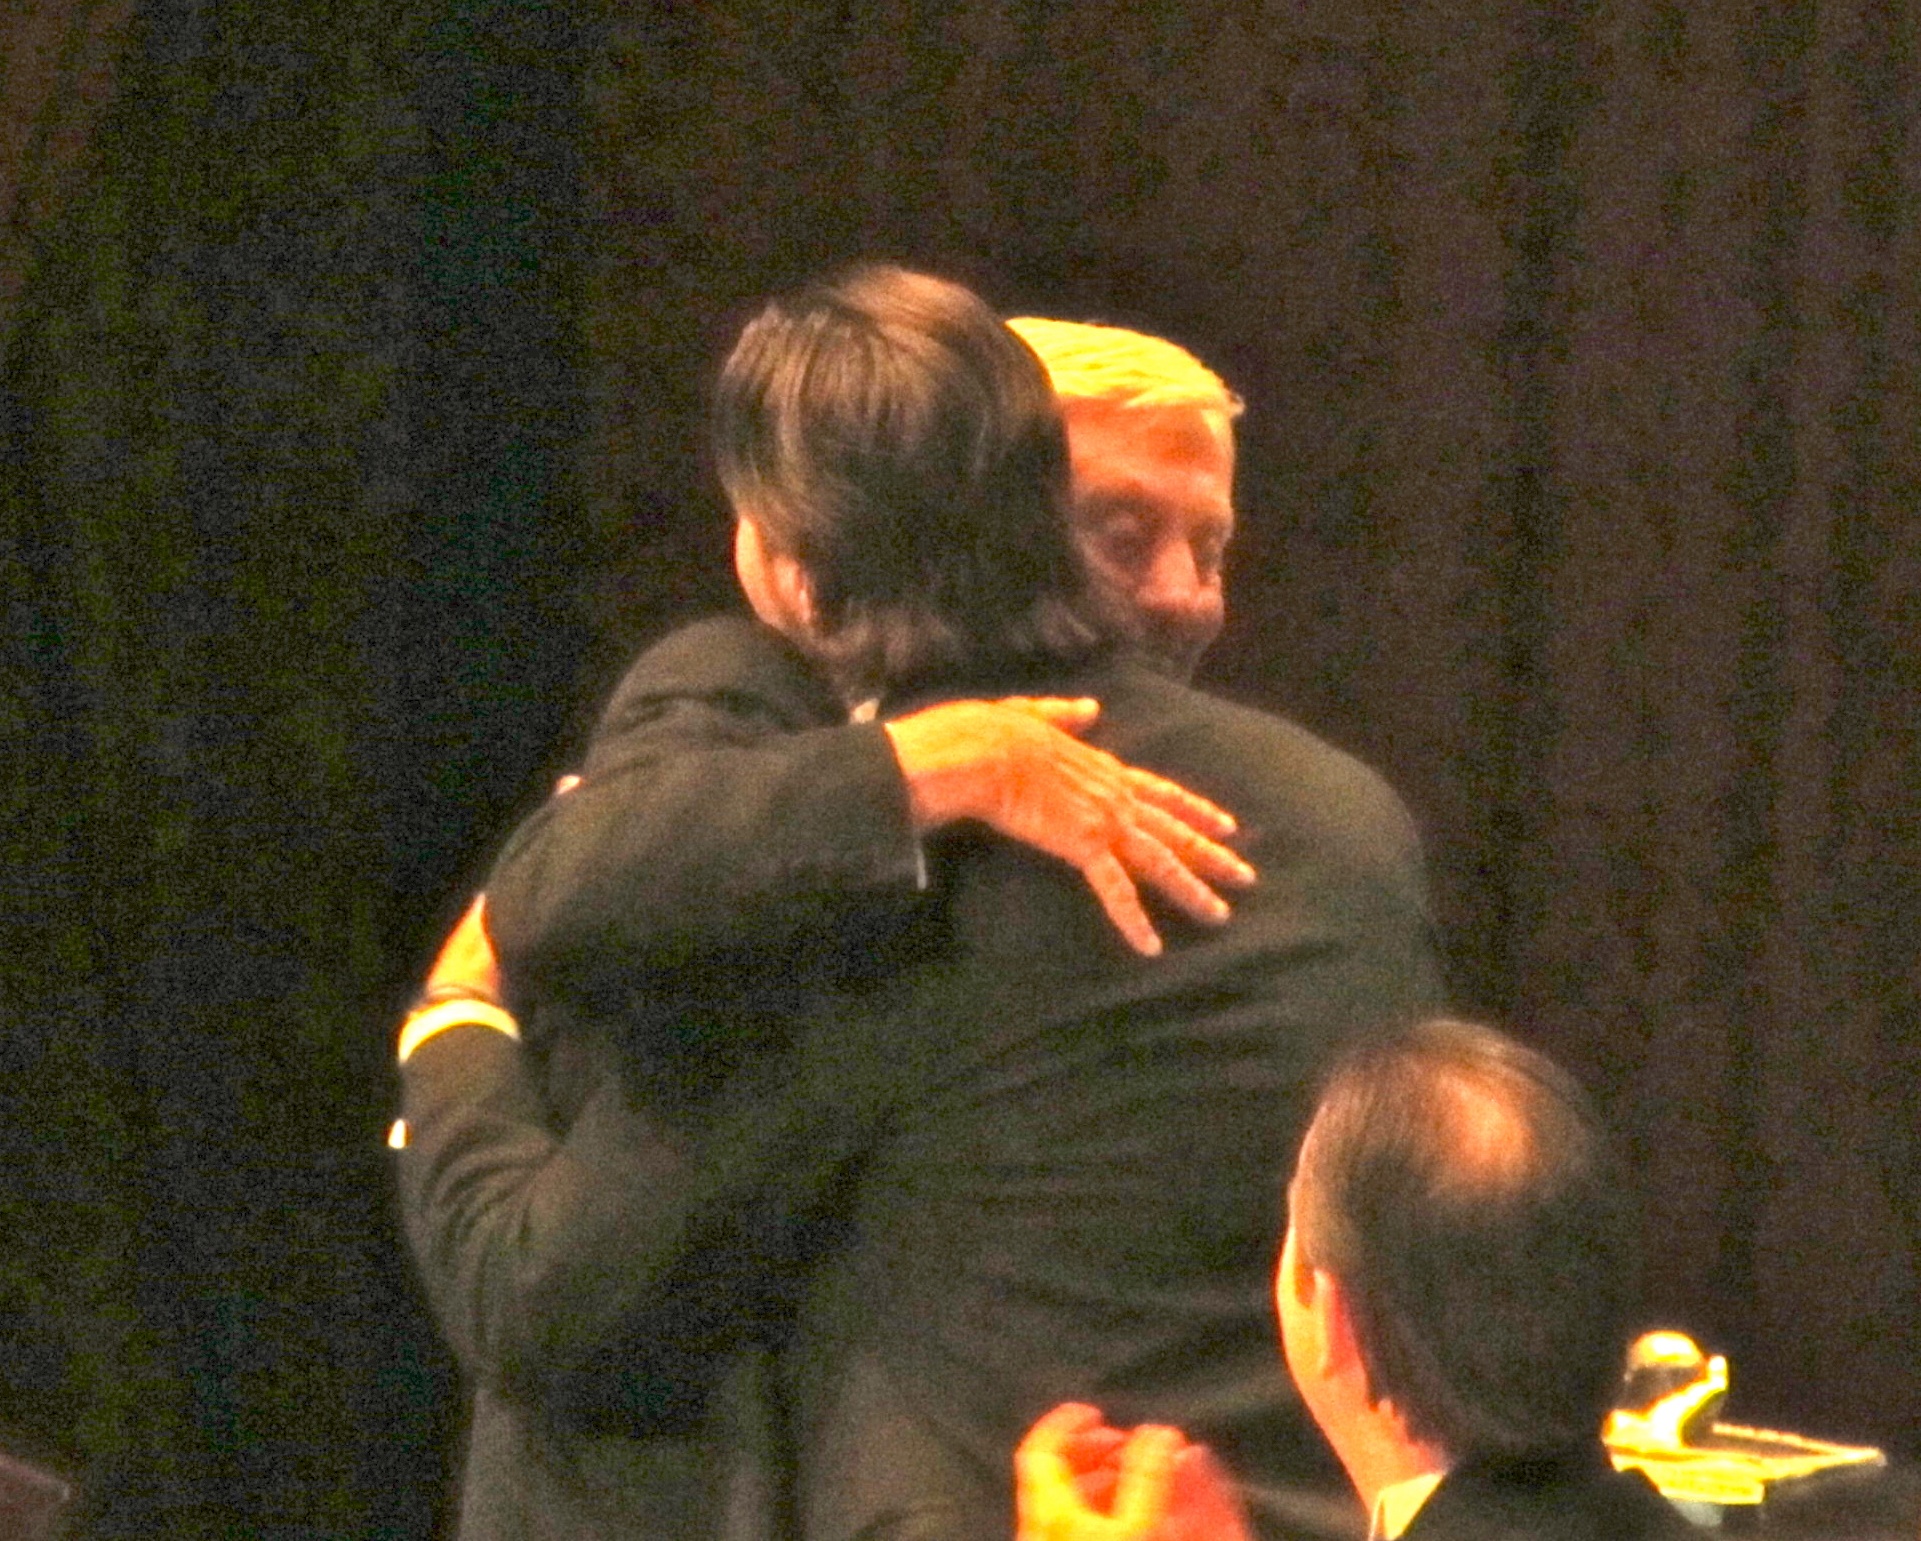 Phil Niekro and R.A. Dickey embrace.